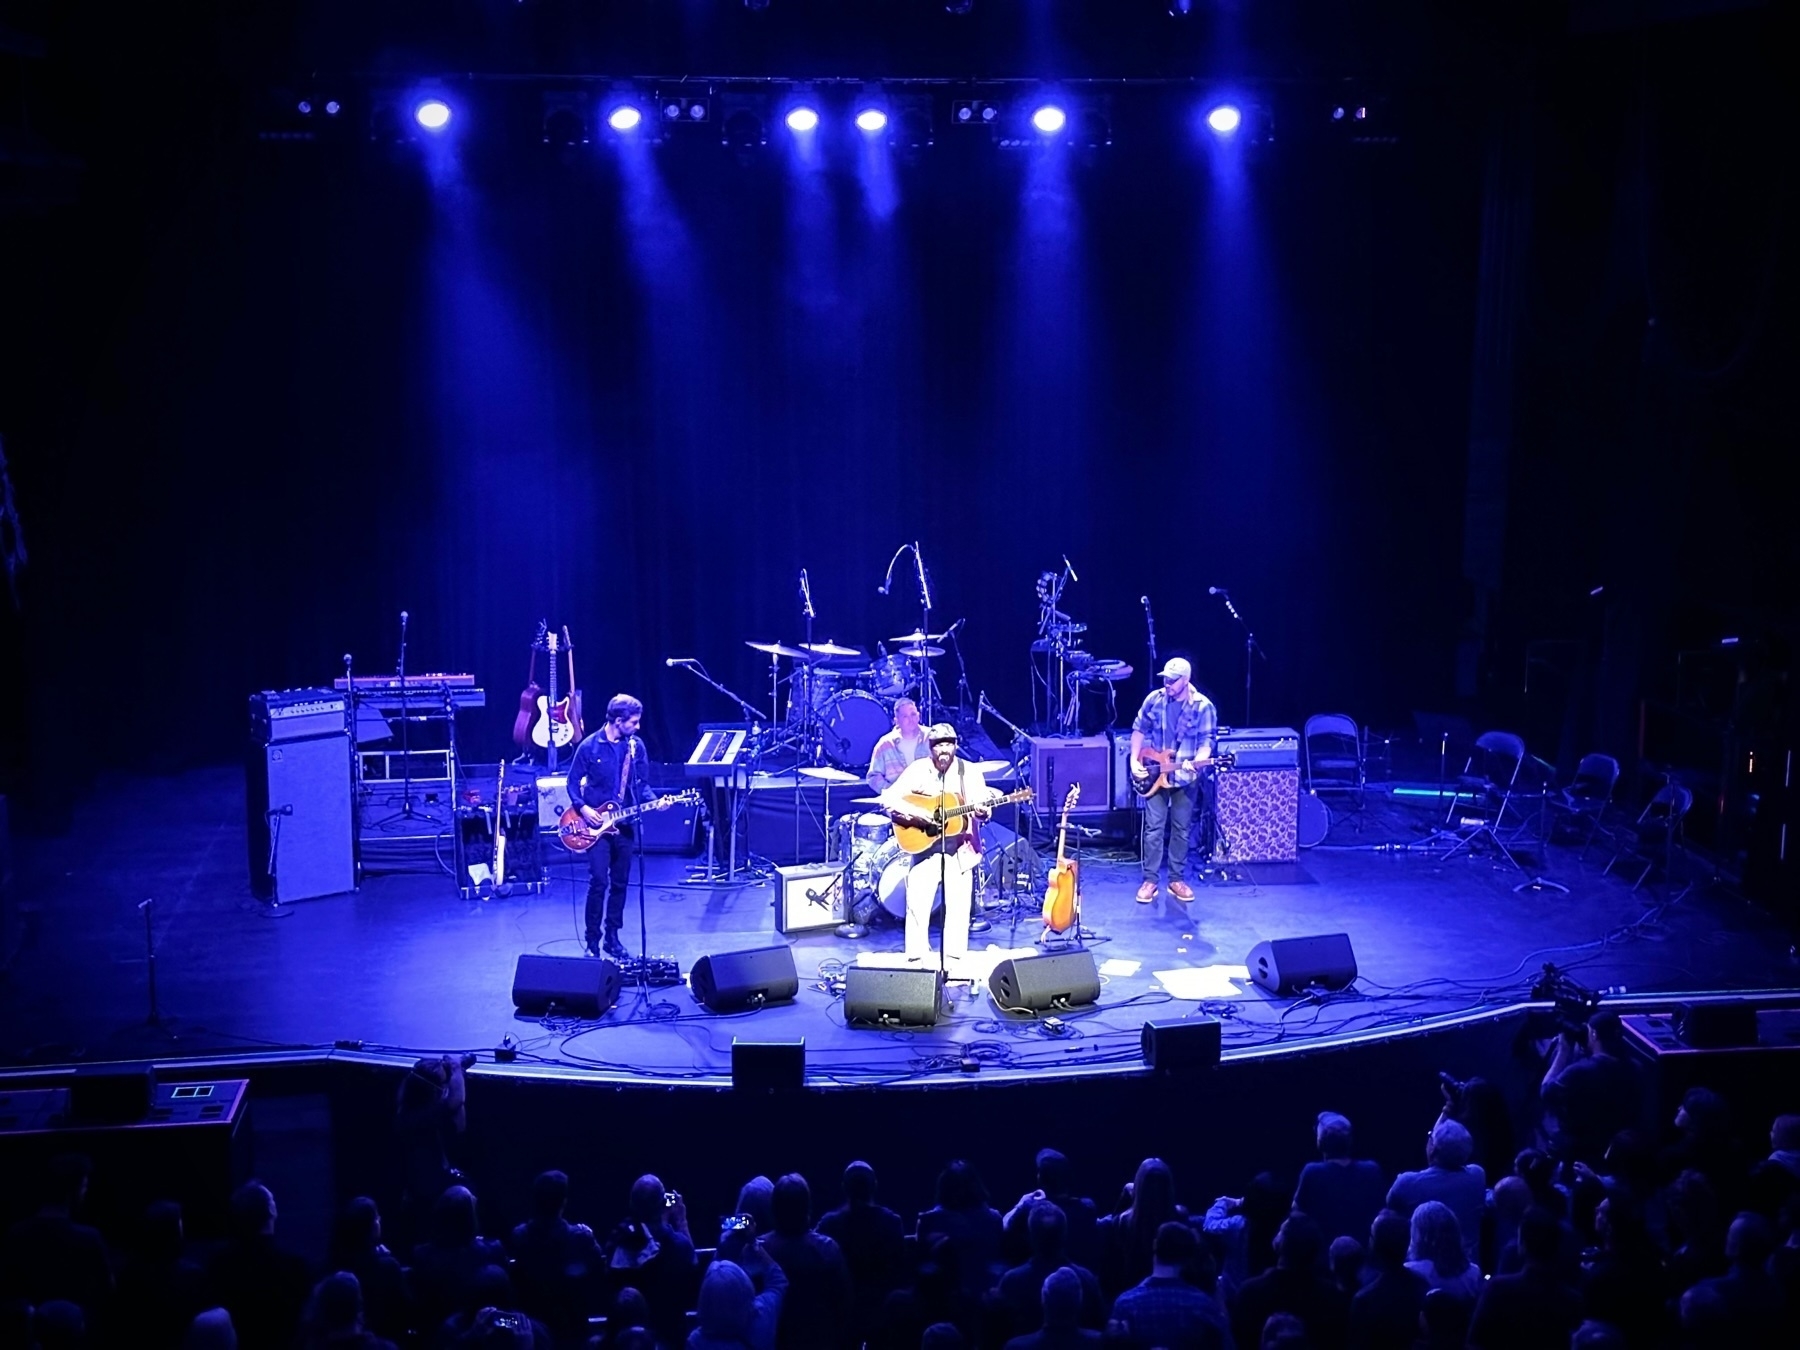 A live concert setting with musicians performing on stage in front of an audience. The stage is lit with blue lighting and features a seated guitarist in the center, with standing band members on either side. There are guitars and other musical equipment arranged around the performers